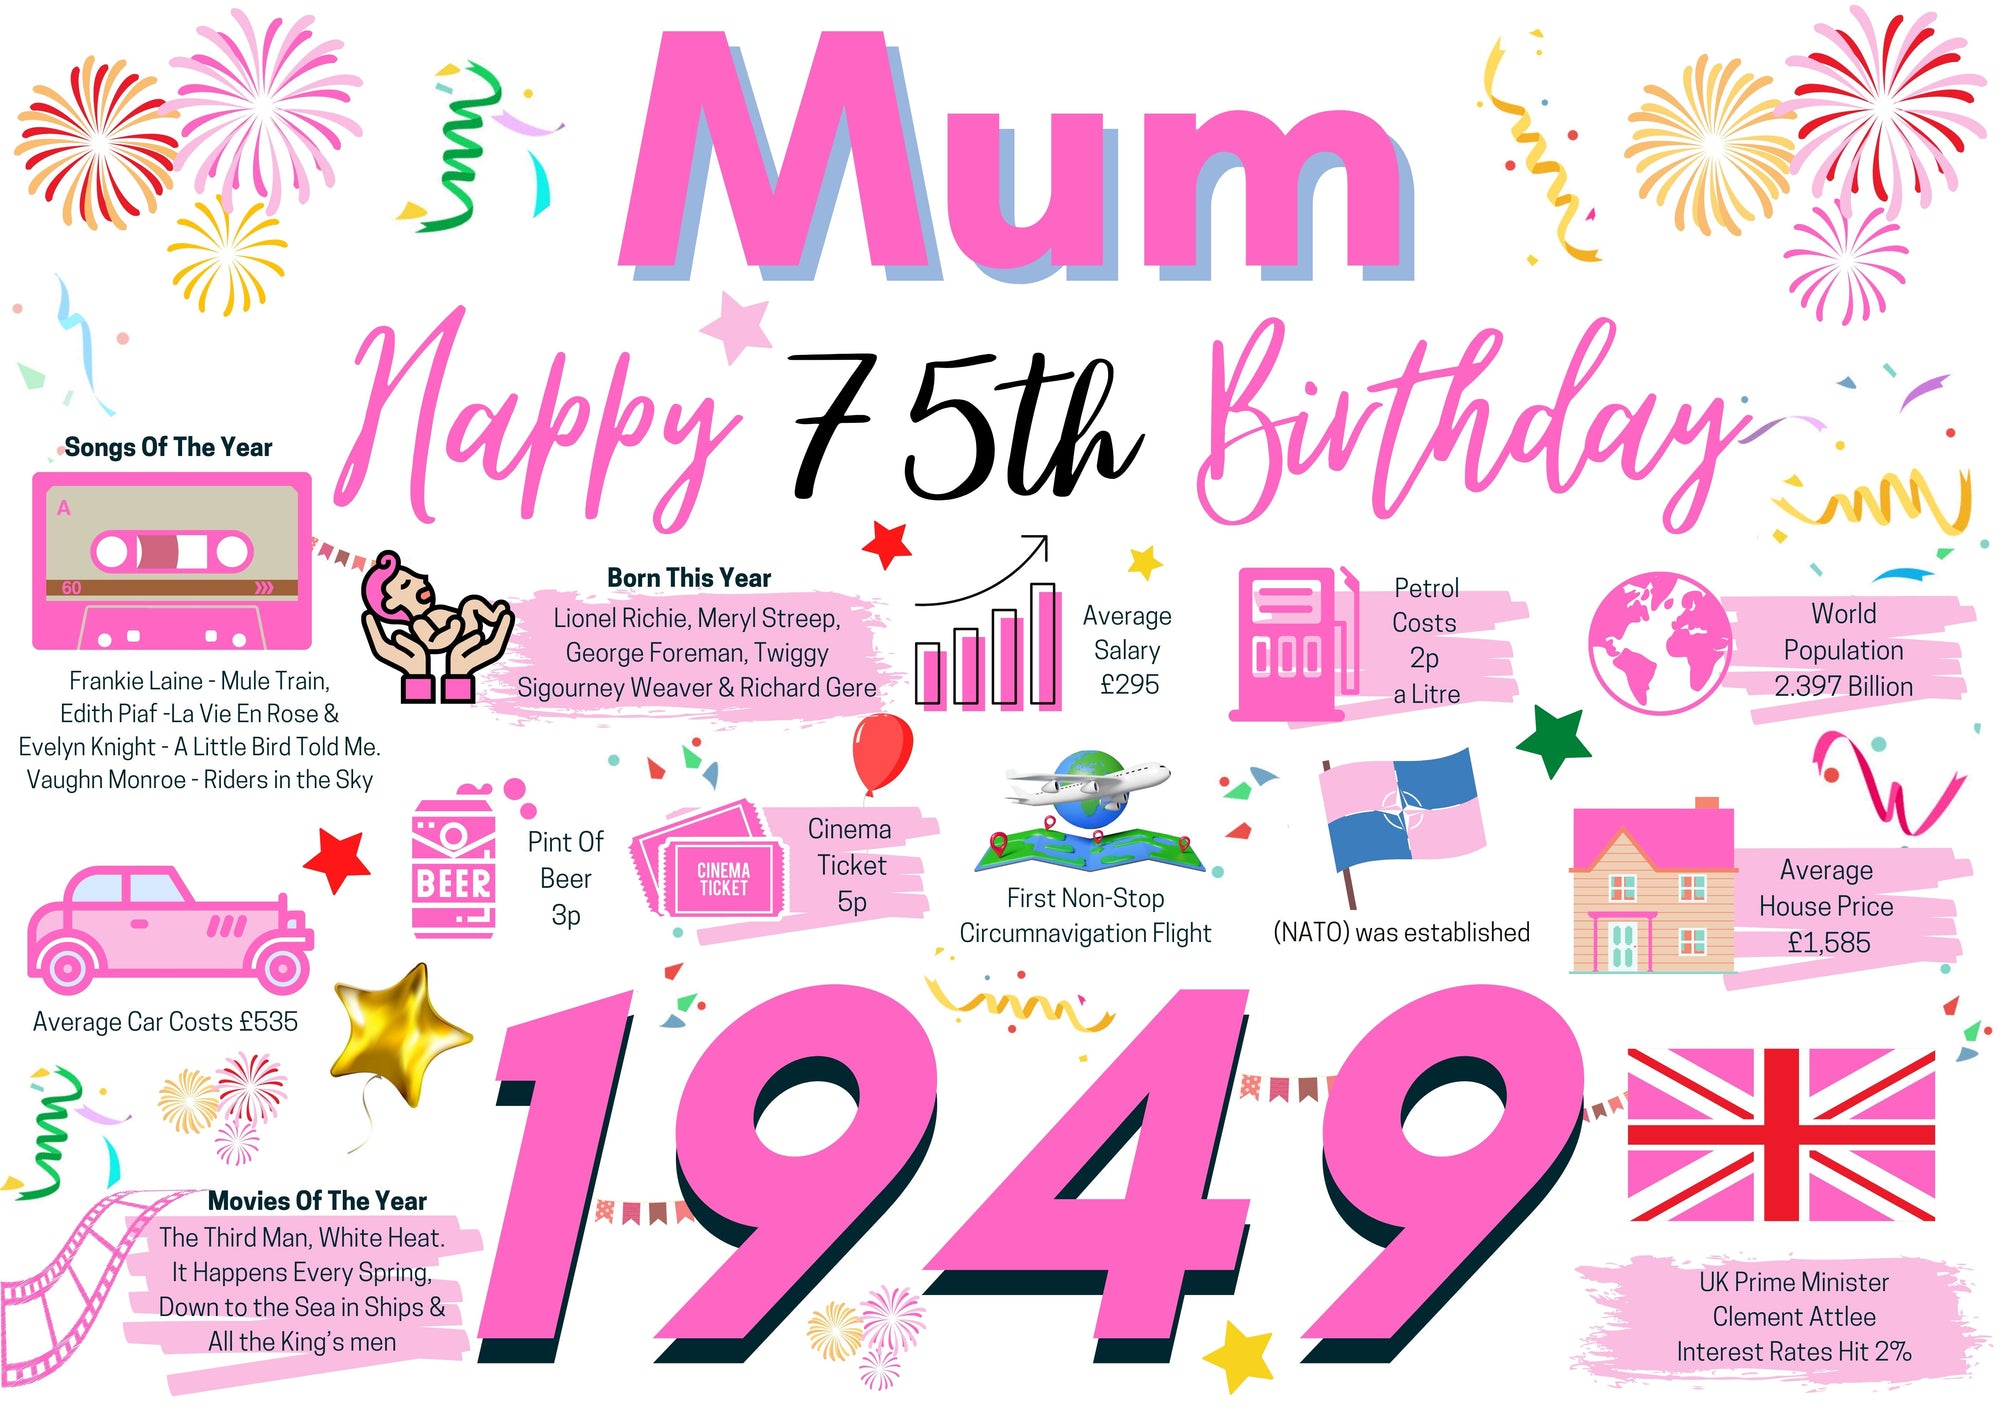 75th Birthday Card For Mum, Birthday Card 75 For Her, Happy 75th Greetings Card Born In 1949 Facts Milestone